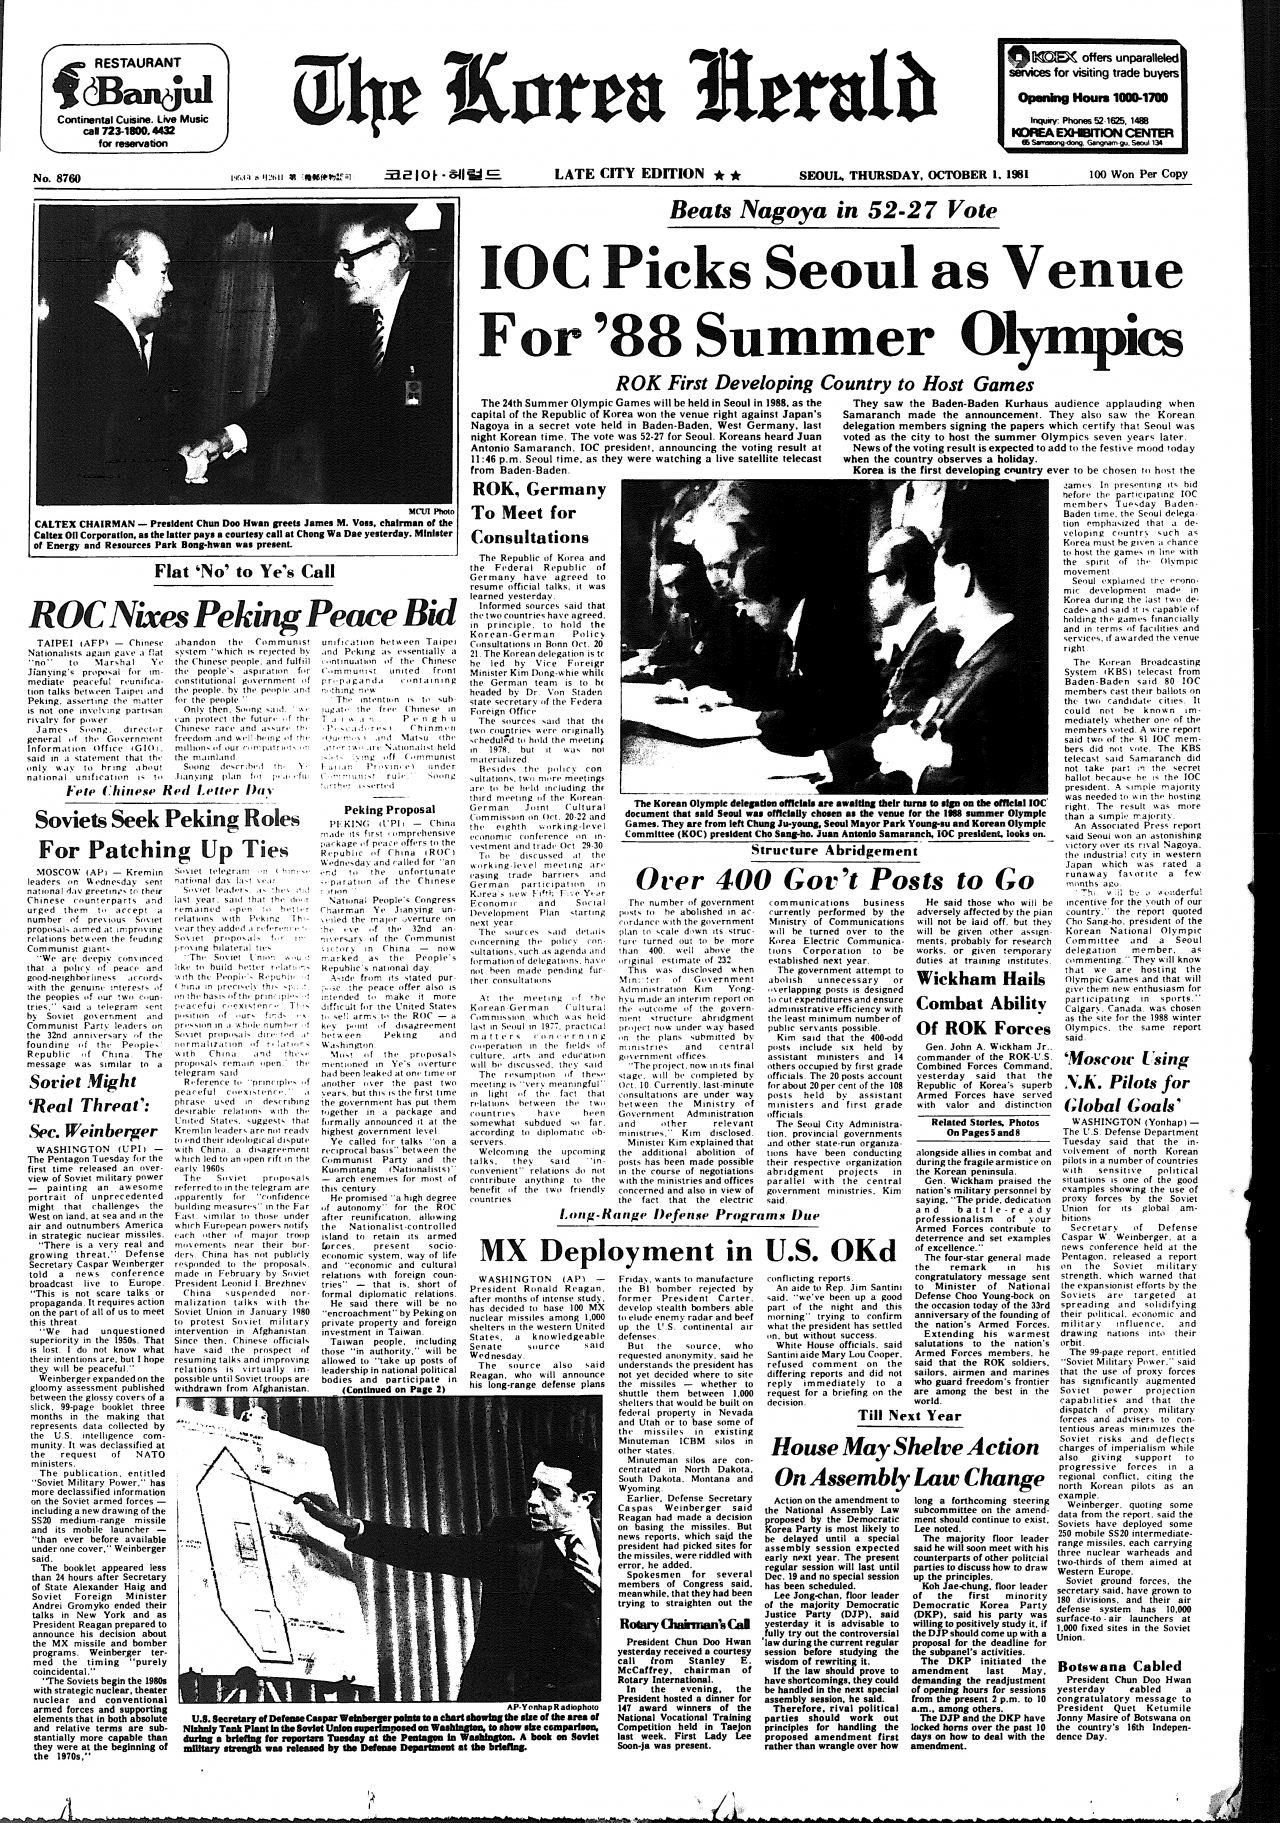 This Oct. 1, 1981, edition of The Korea Herald tells how Seoul was picked as the venue for the 1988 Summer Olympics. (The Korea Herald)